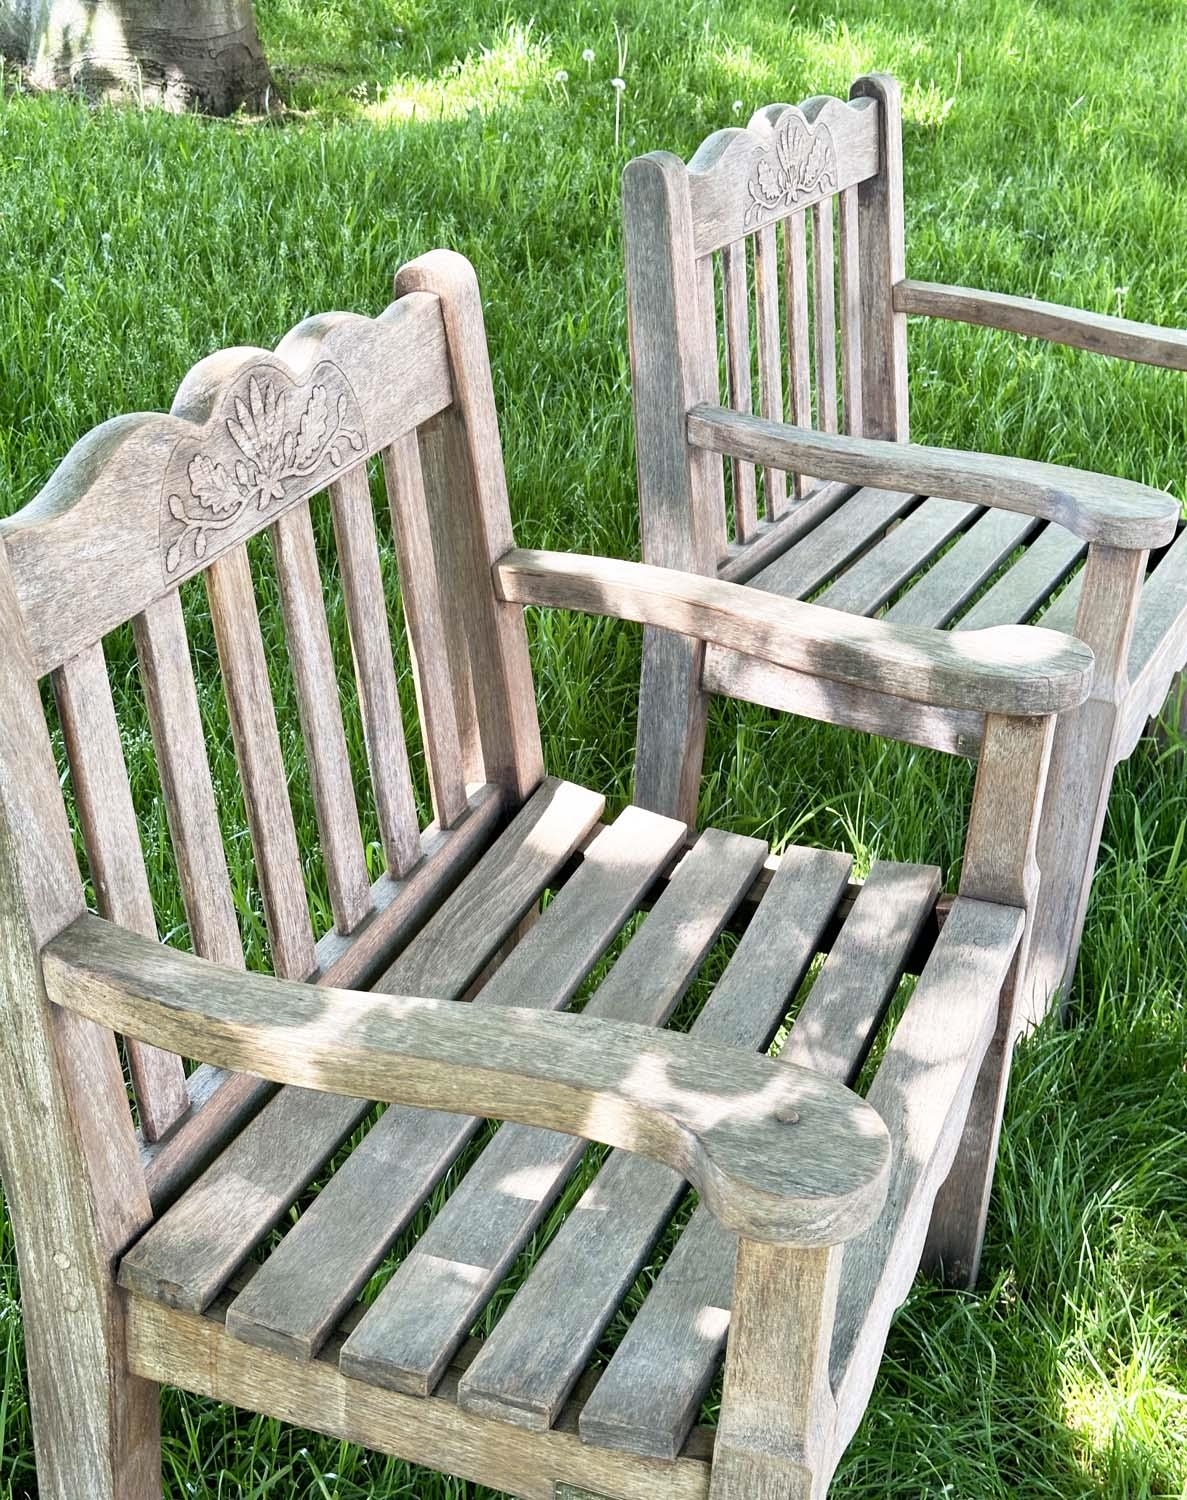 GARDEN ARMCHAIRS BY BRIDGMAN & CO LTD, a pair, well weathered teak with generous seats, slatted - Image 22 of 22